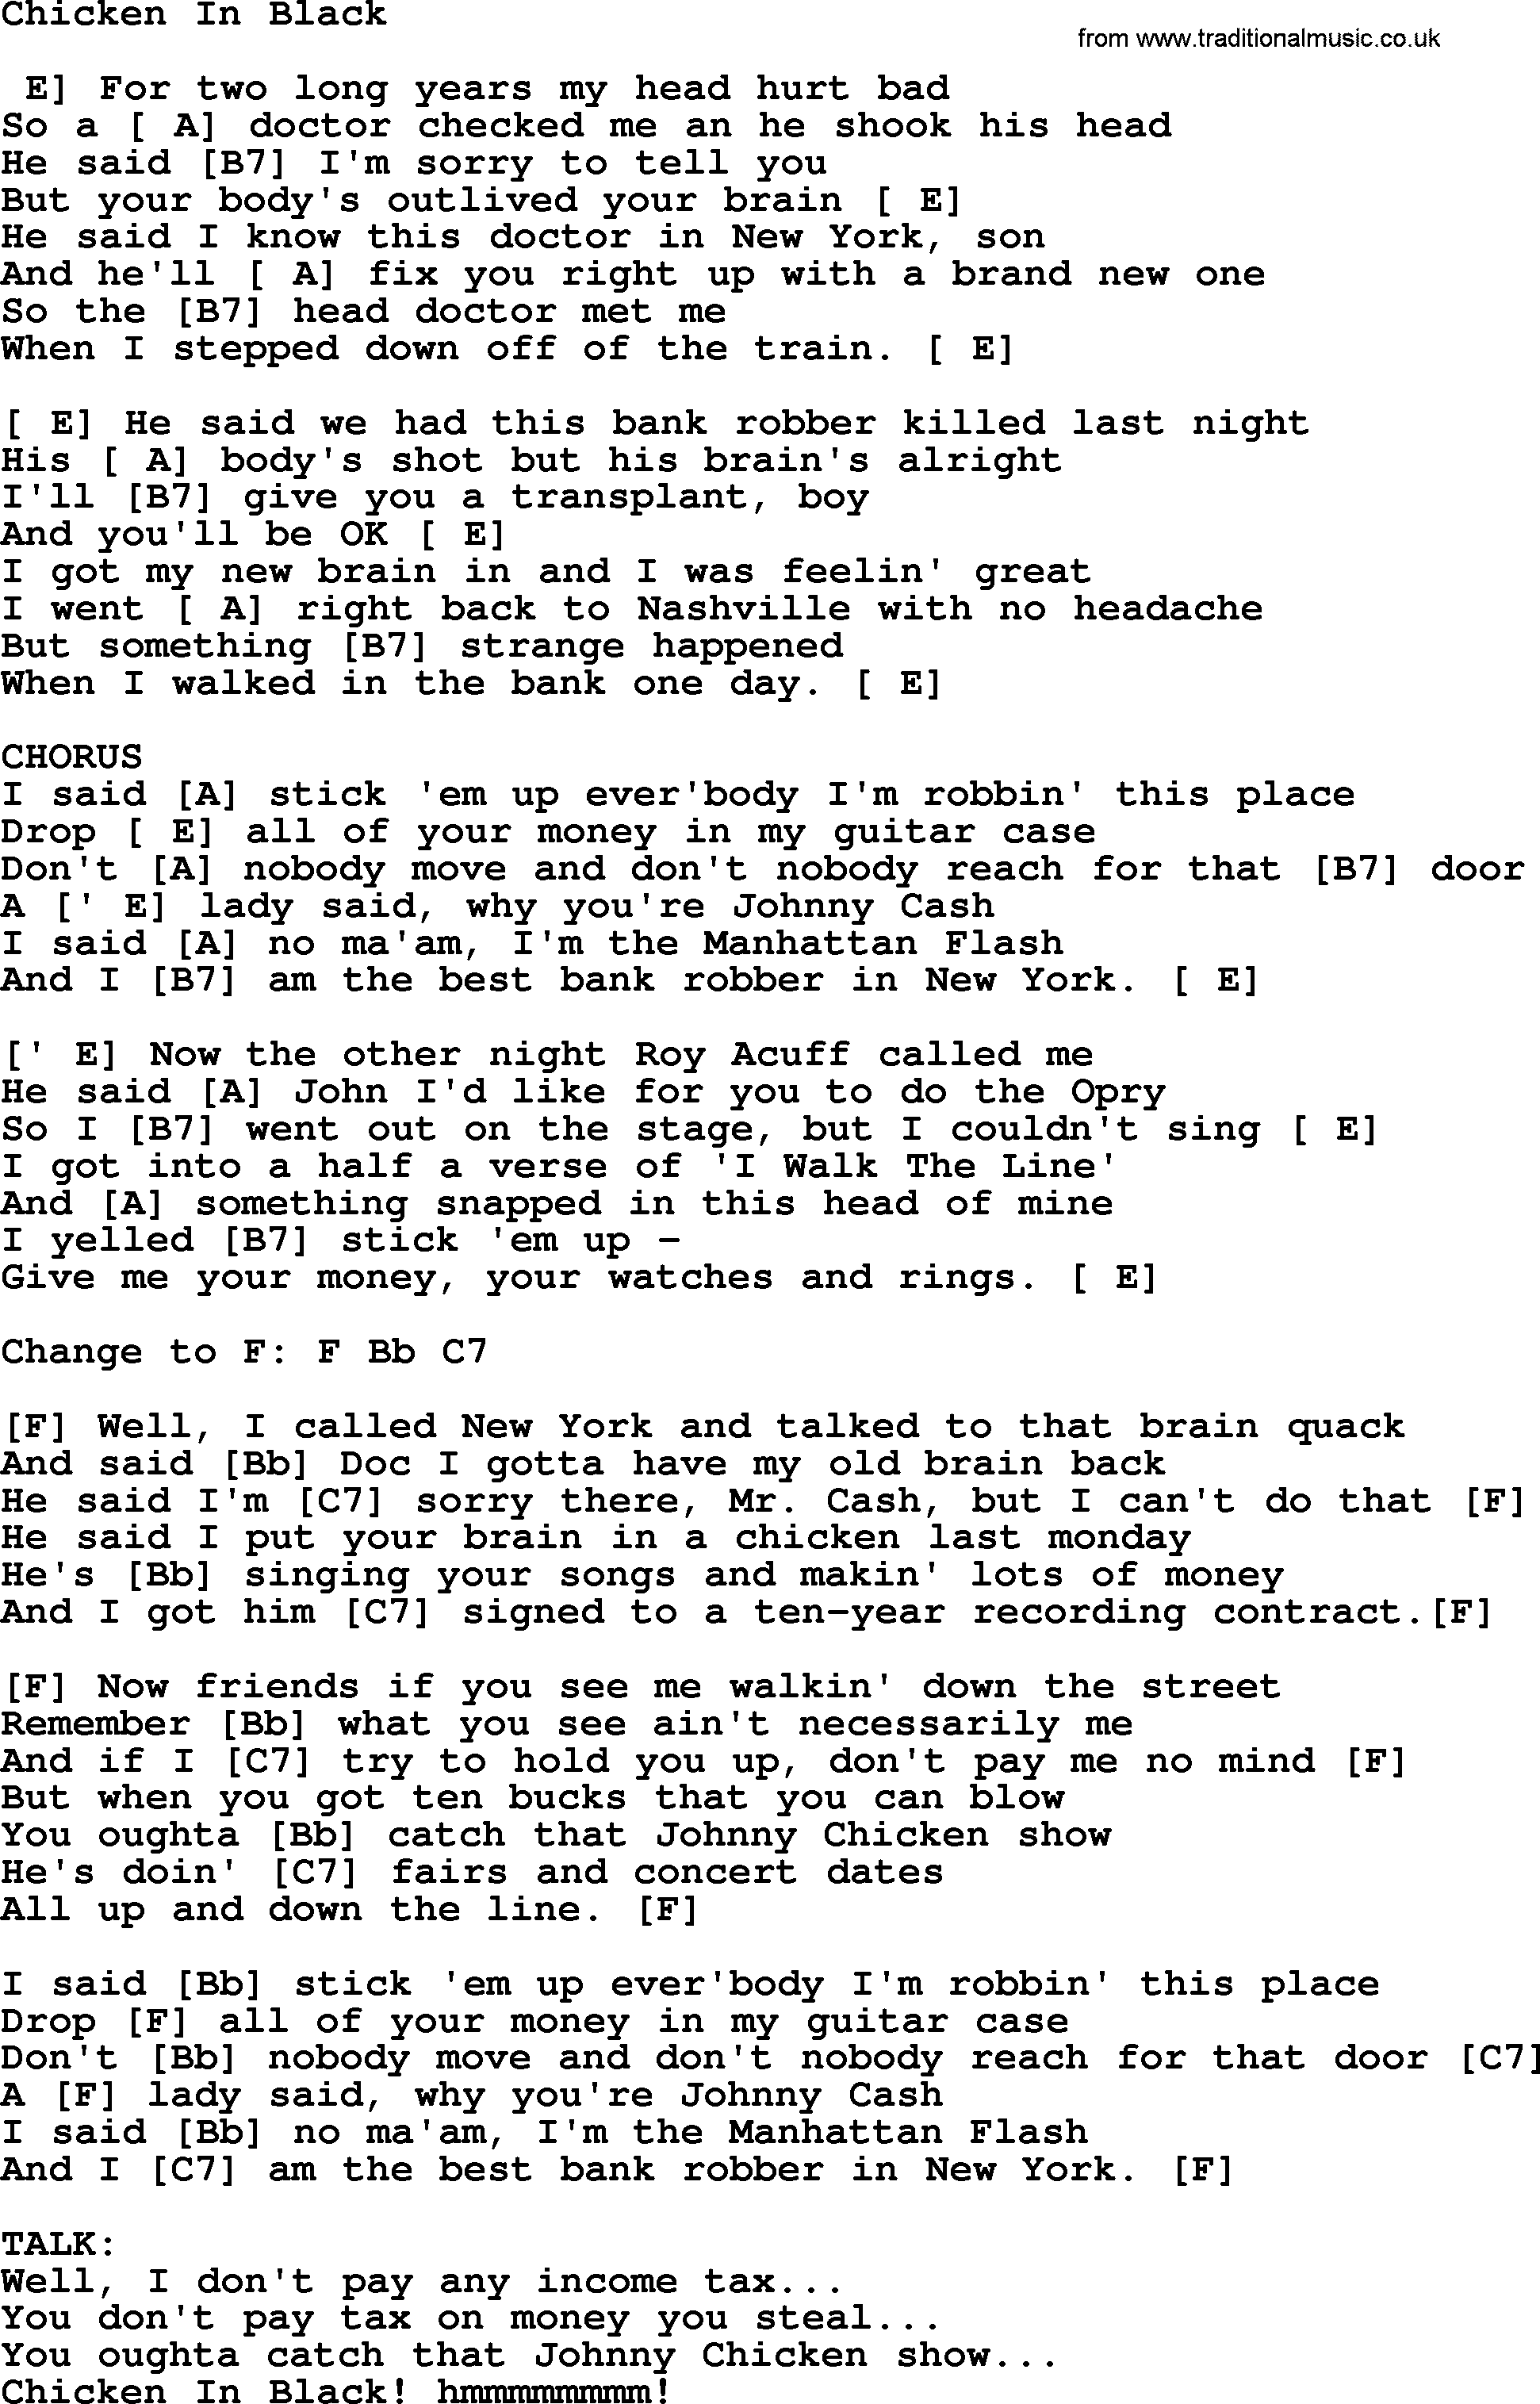 Johnny Cash song Chicken In Black, lyrics and chords